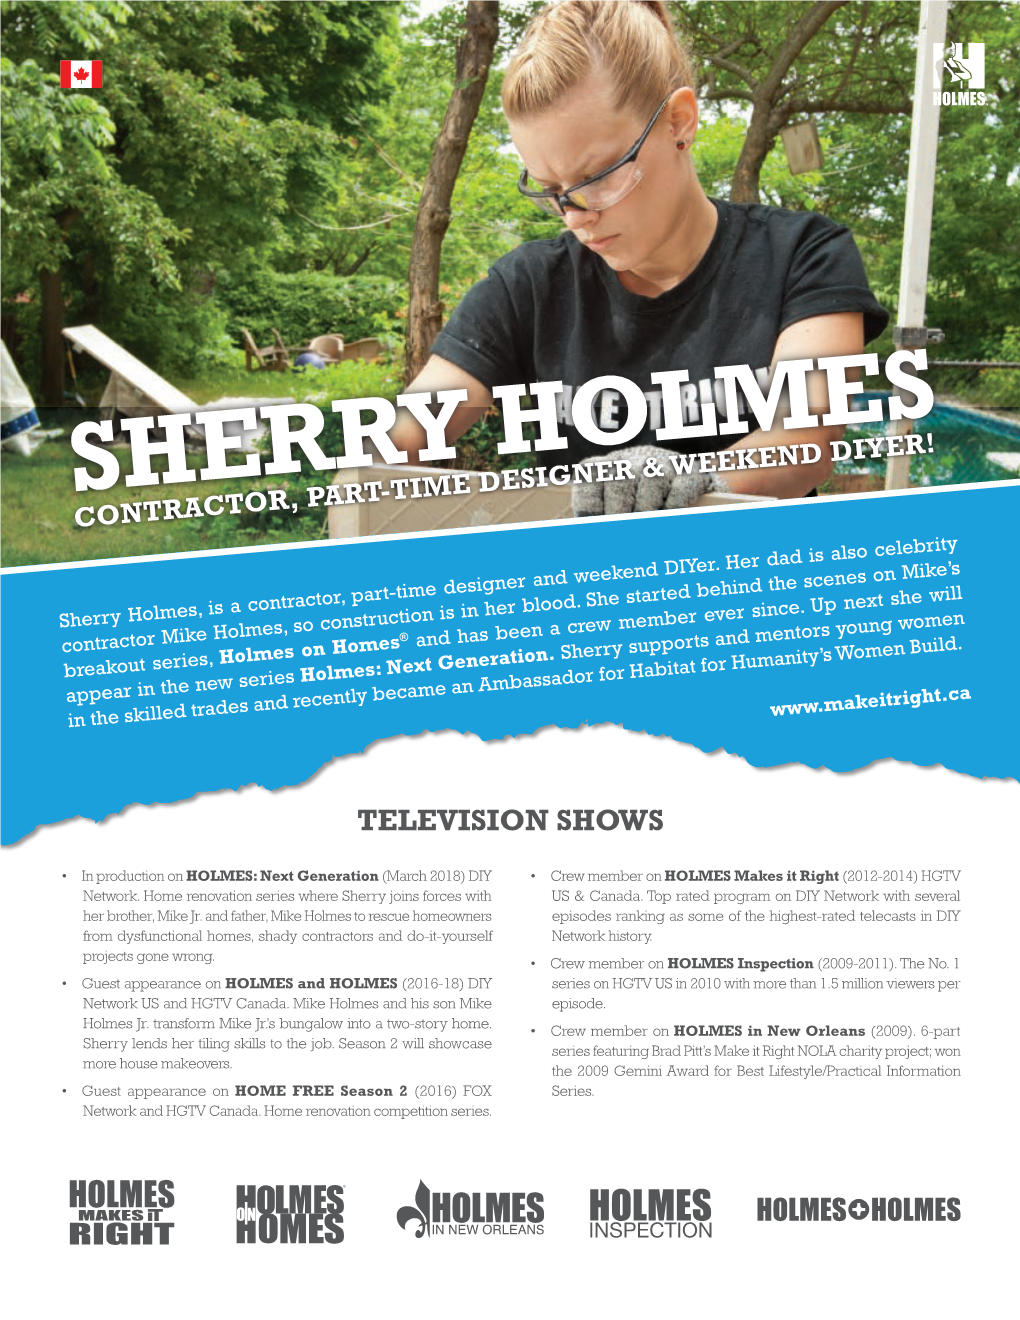 Sherry Holmes Contractor, Part-Time Designer & Weekend Diyer!